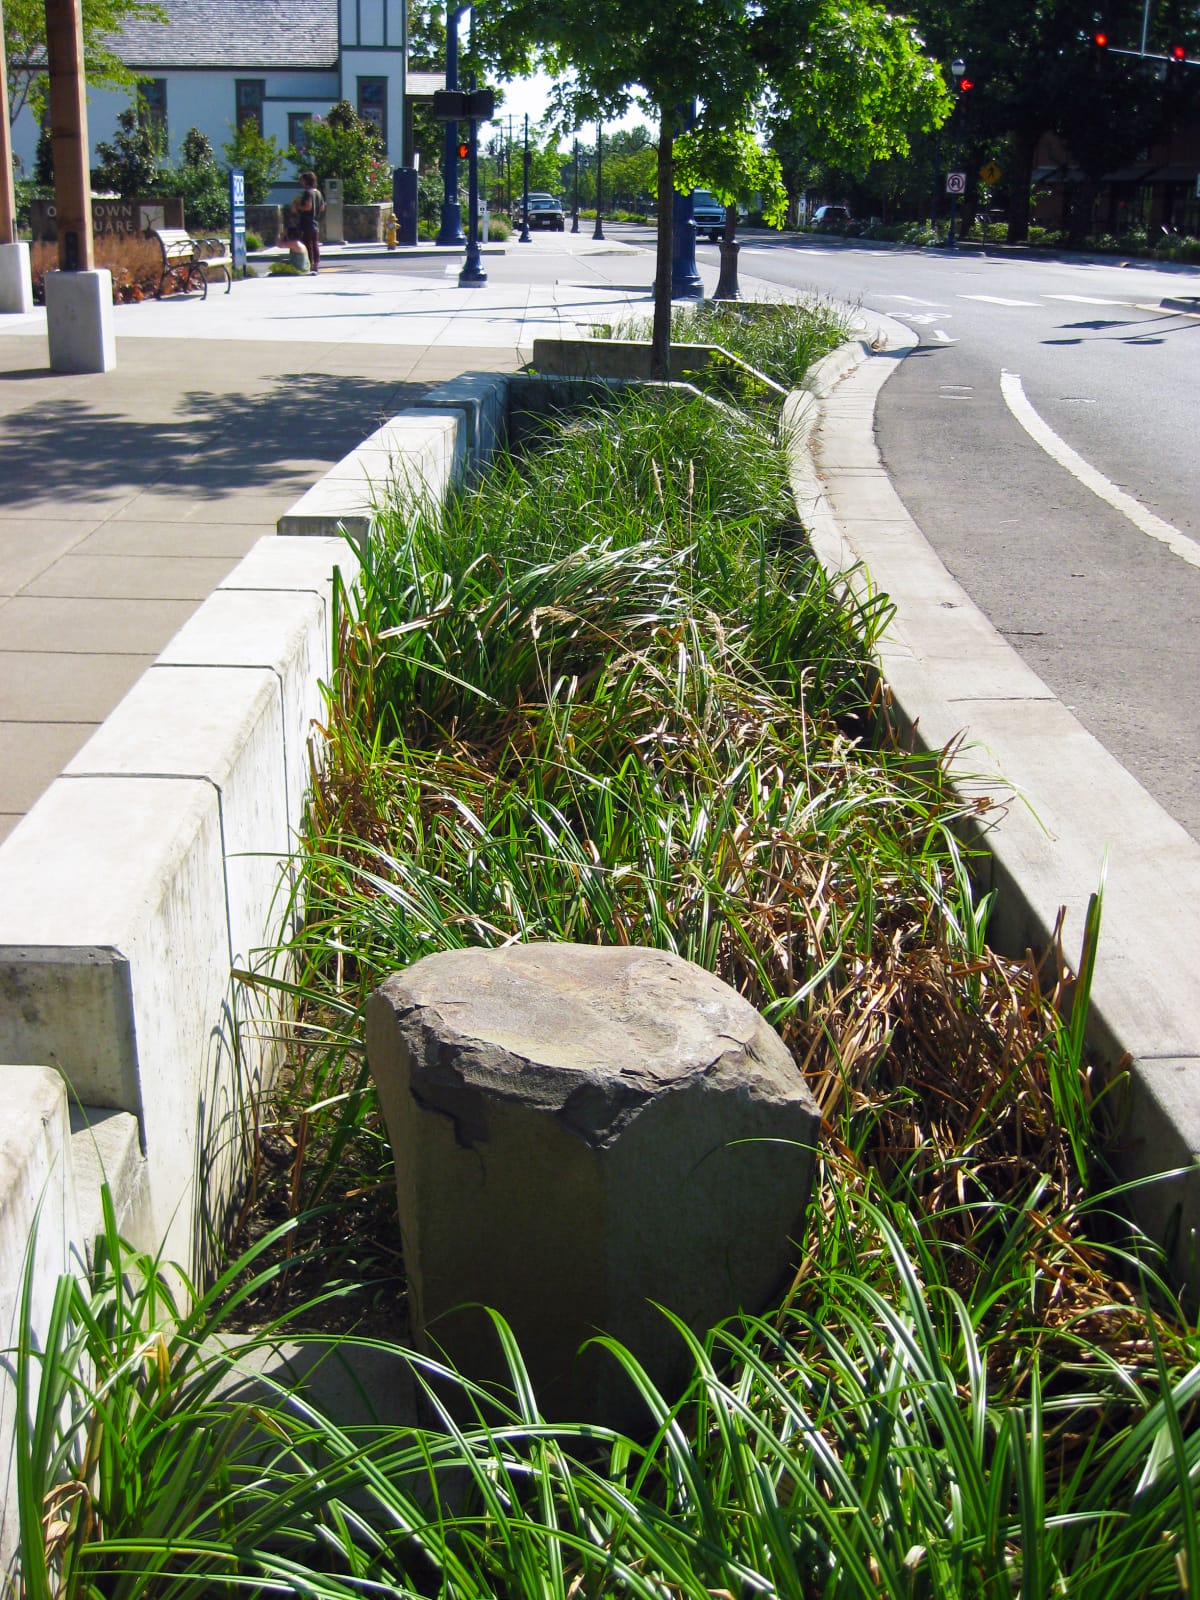 This stormwater facility has been well cared for and is inviting to walk past.